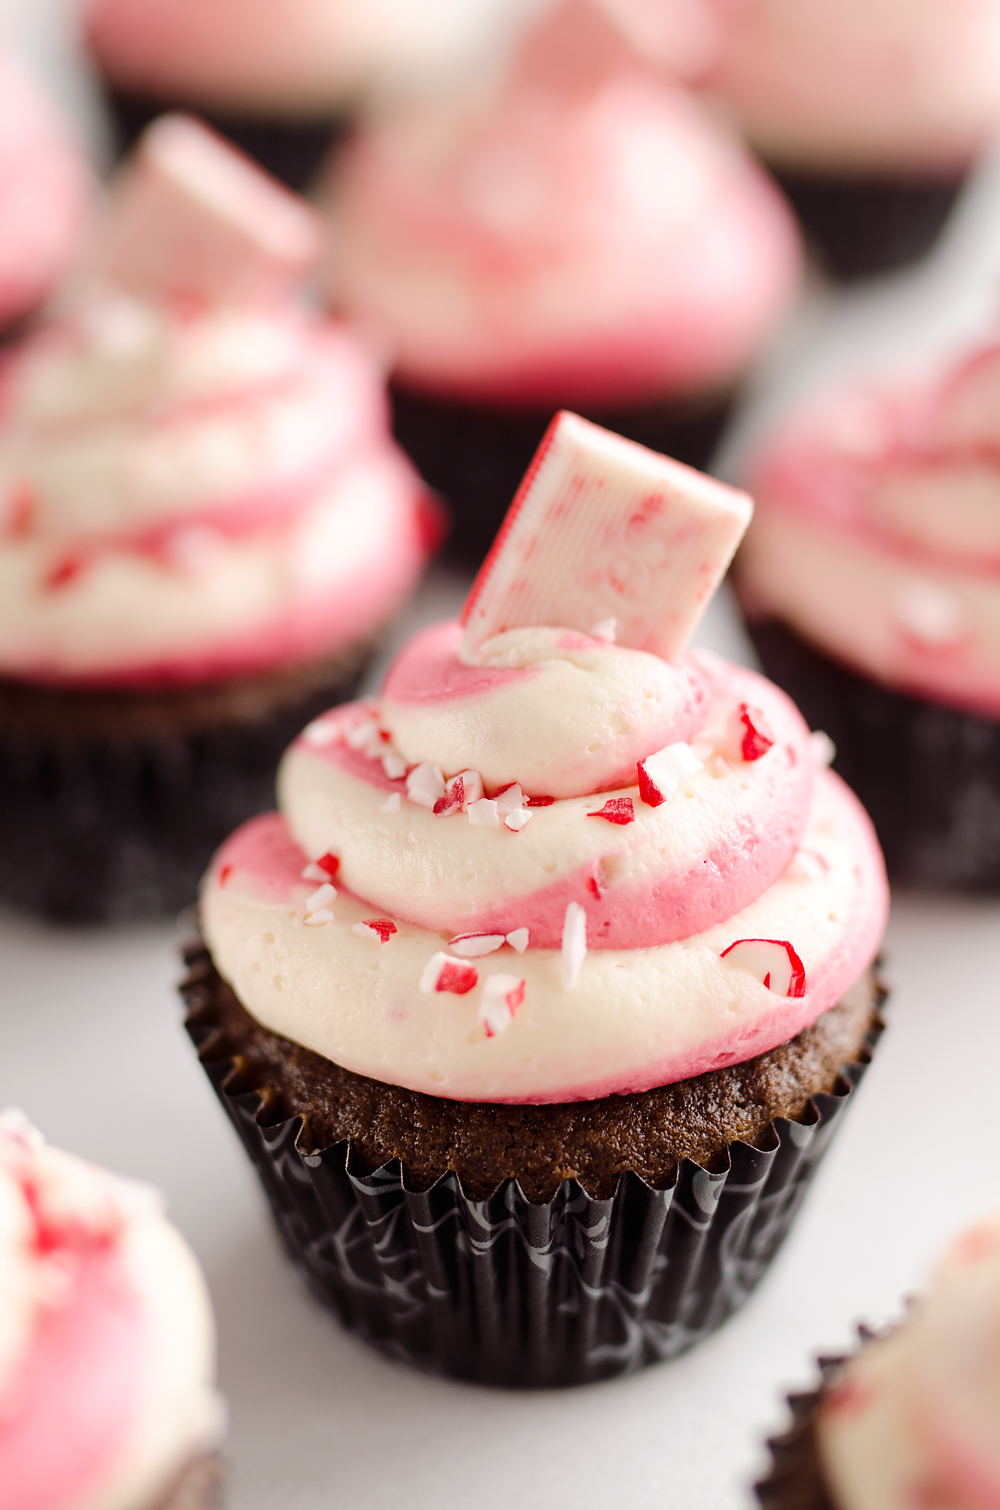 https://www.thecreativebite.com/wp-content/uploads/2016/12/Peppermint-Chocolate-Candy-Cane-Cupcakes-The-Creative-Bite-3-copy.jpg